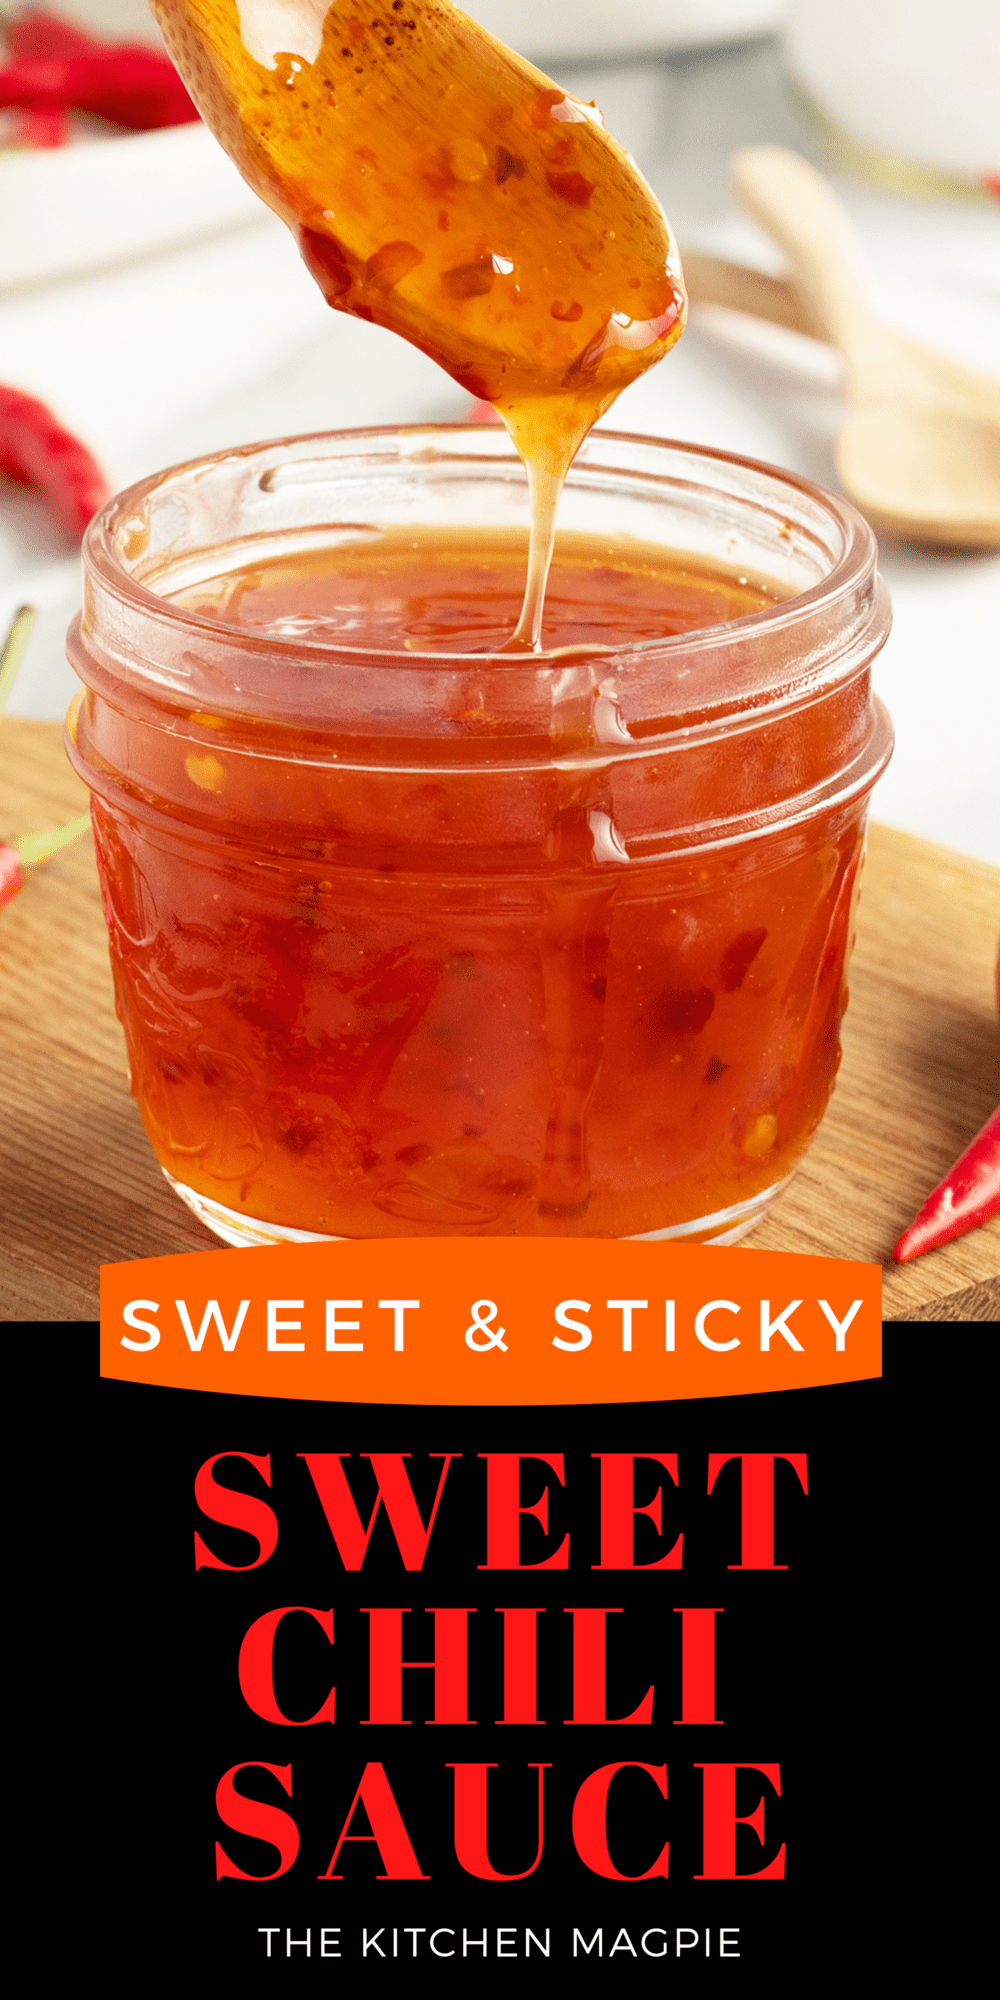 Perfect for dipping your spring rolls or coconut shrimp in, this sweet chili sauce is easy to make and easy to customize to your liking!